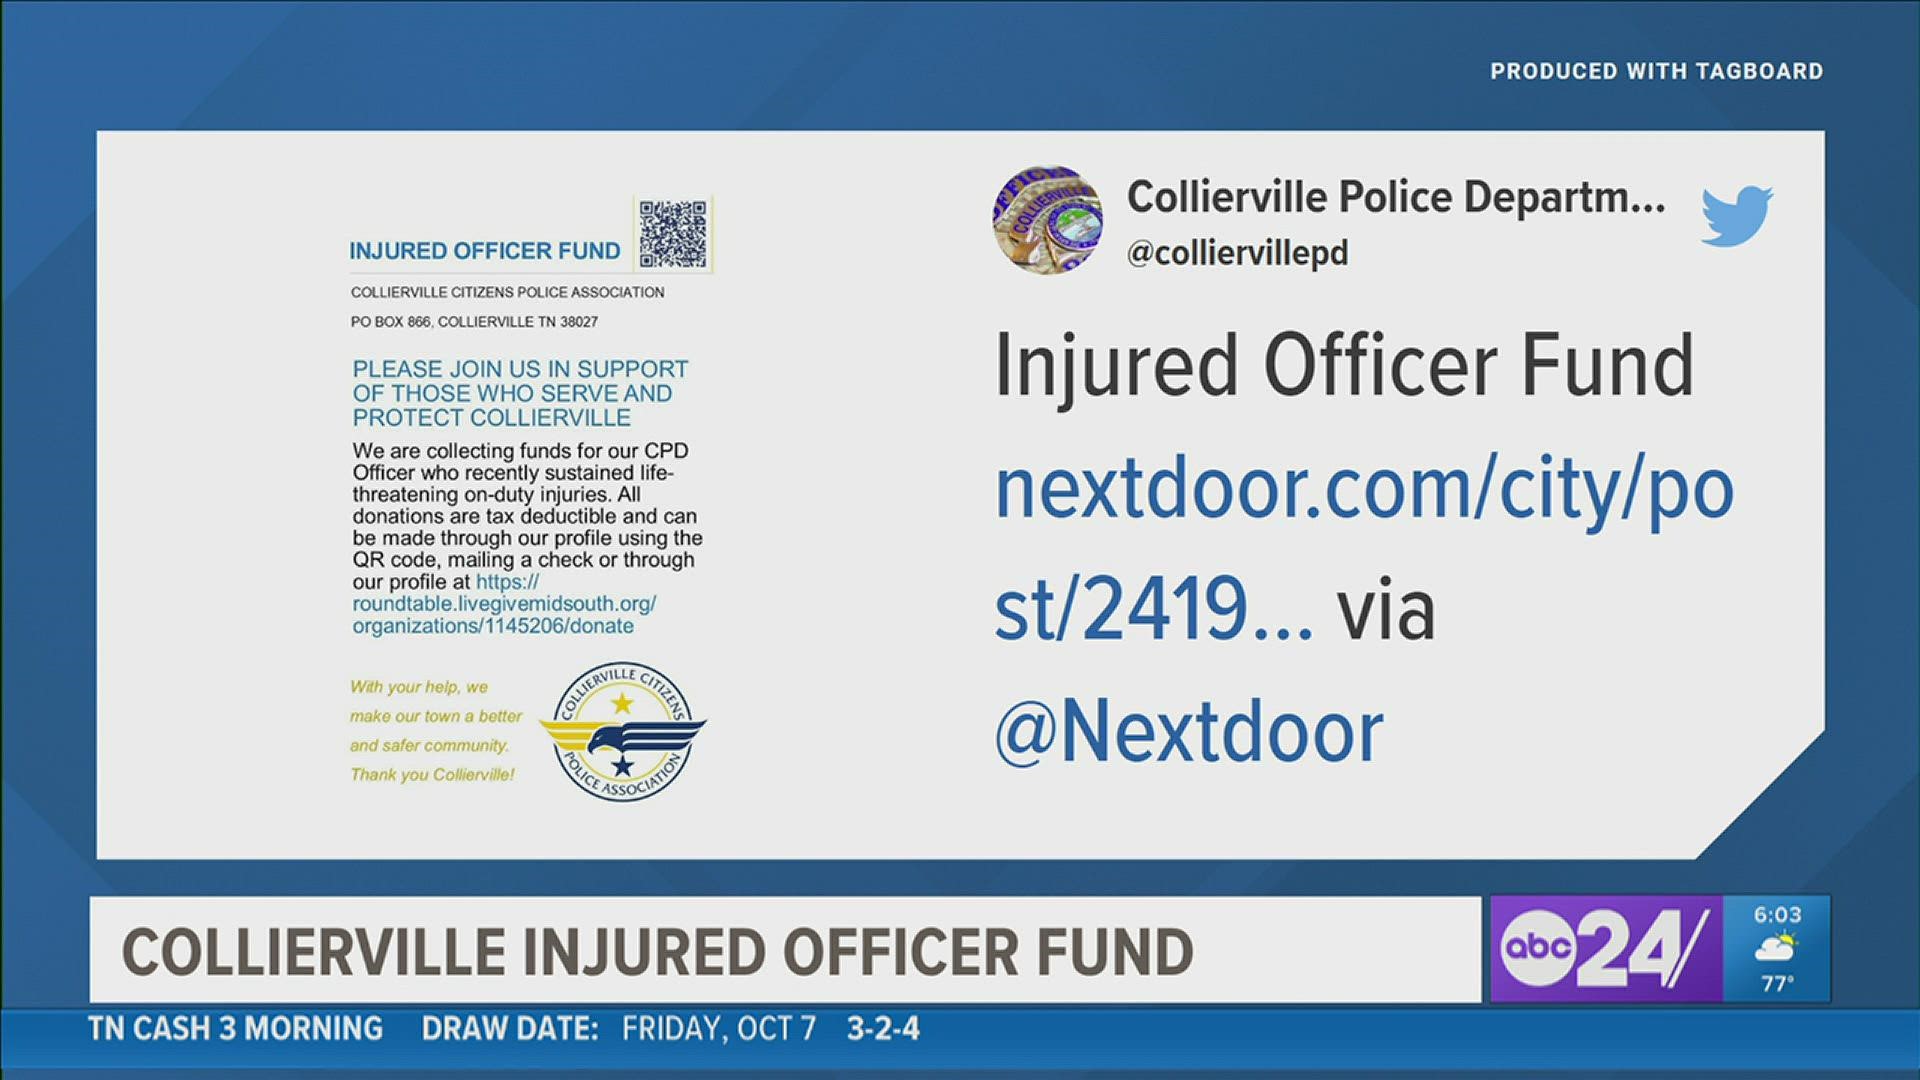 Collierville Police Department said it is taking donations to support one of its officers who survived life-threatening injuries after being run over on the job.